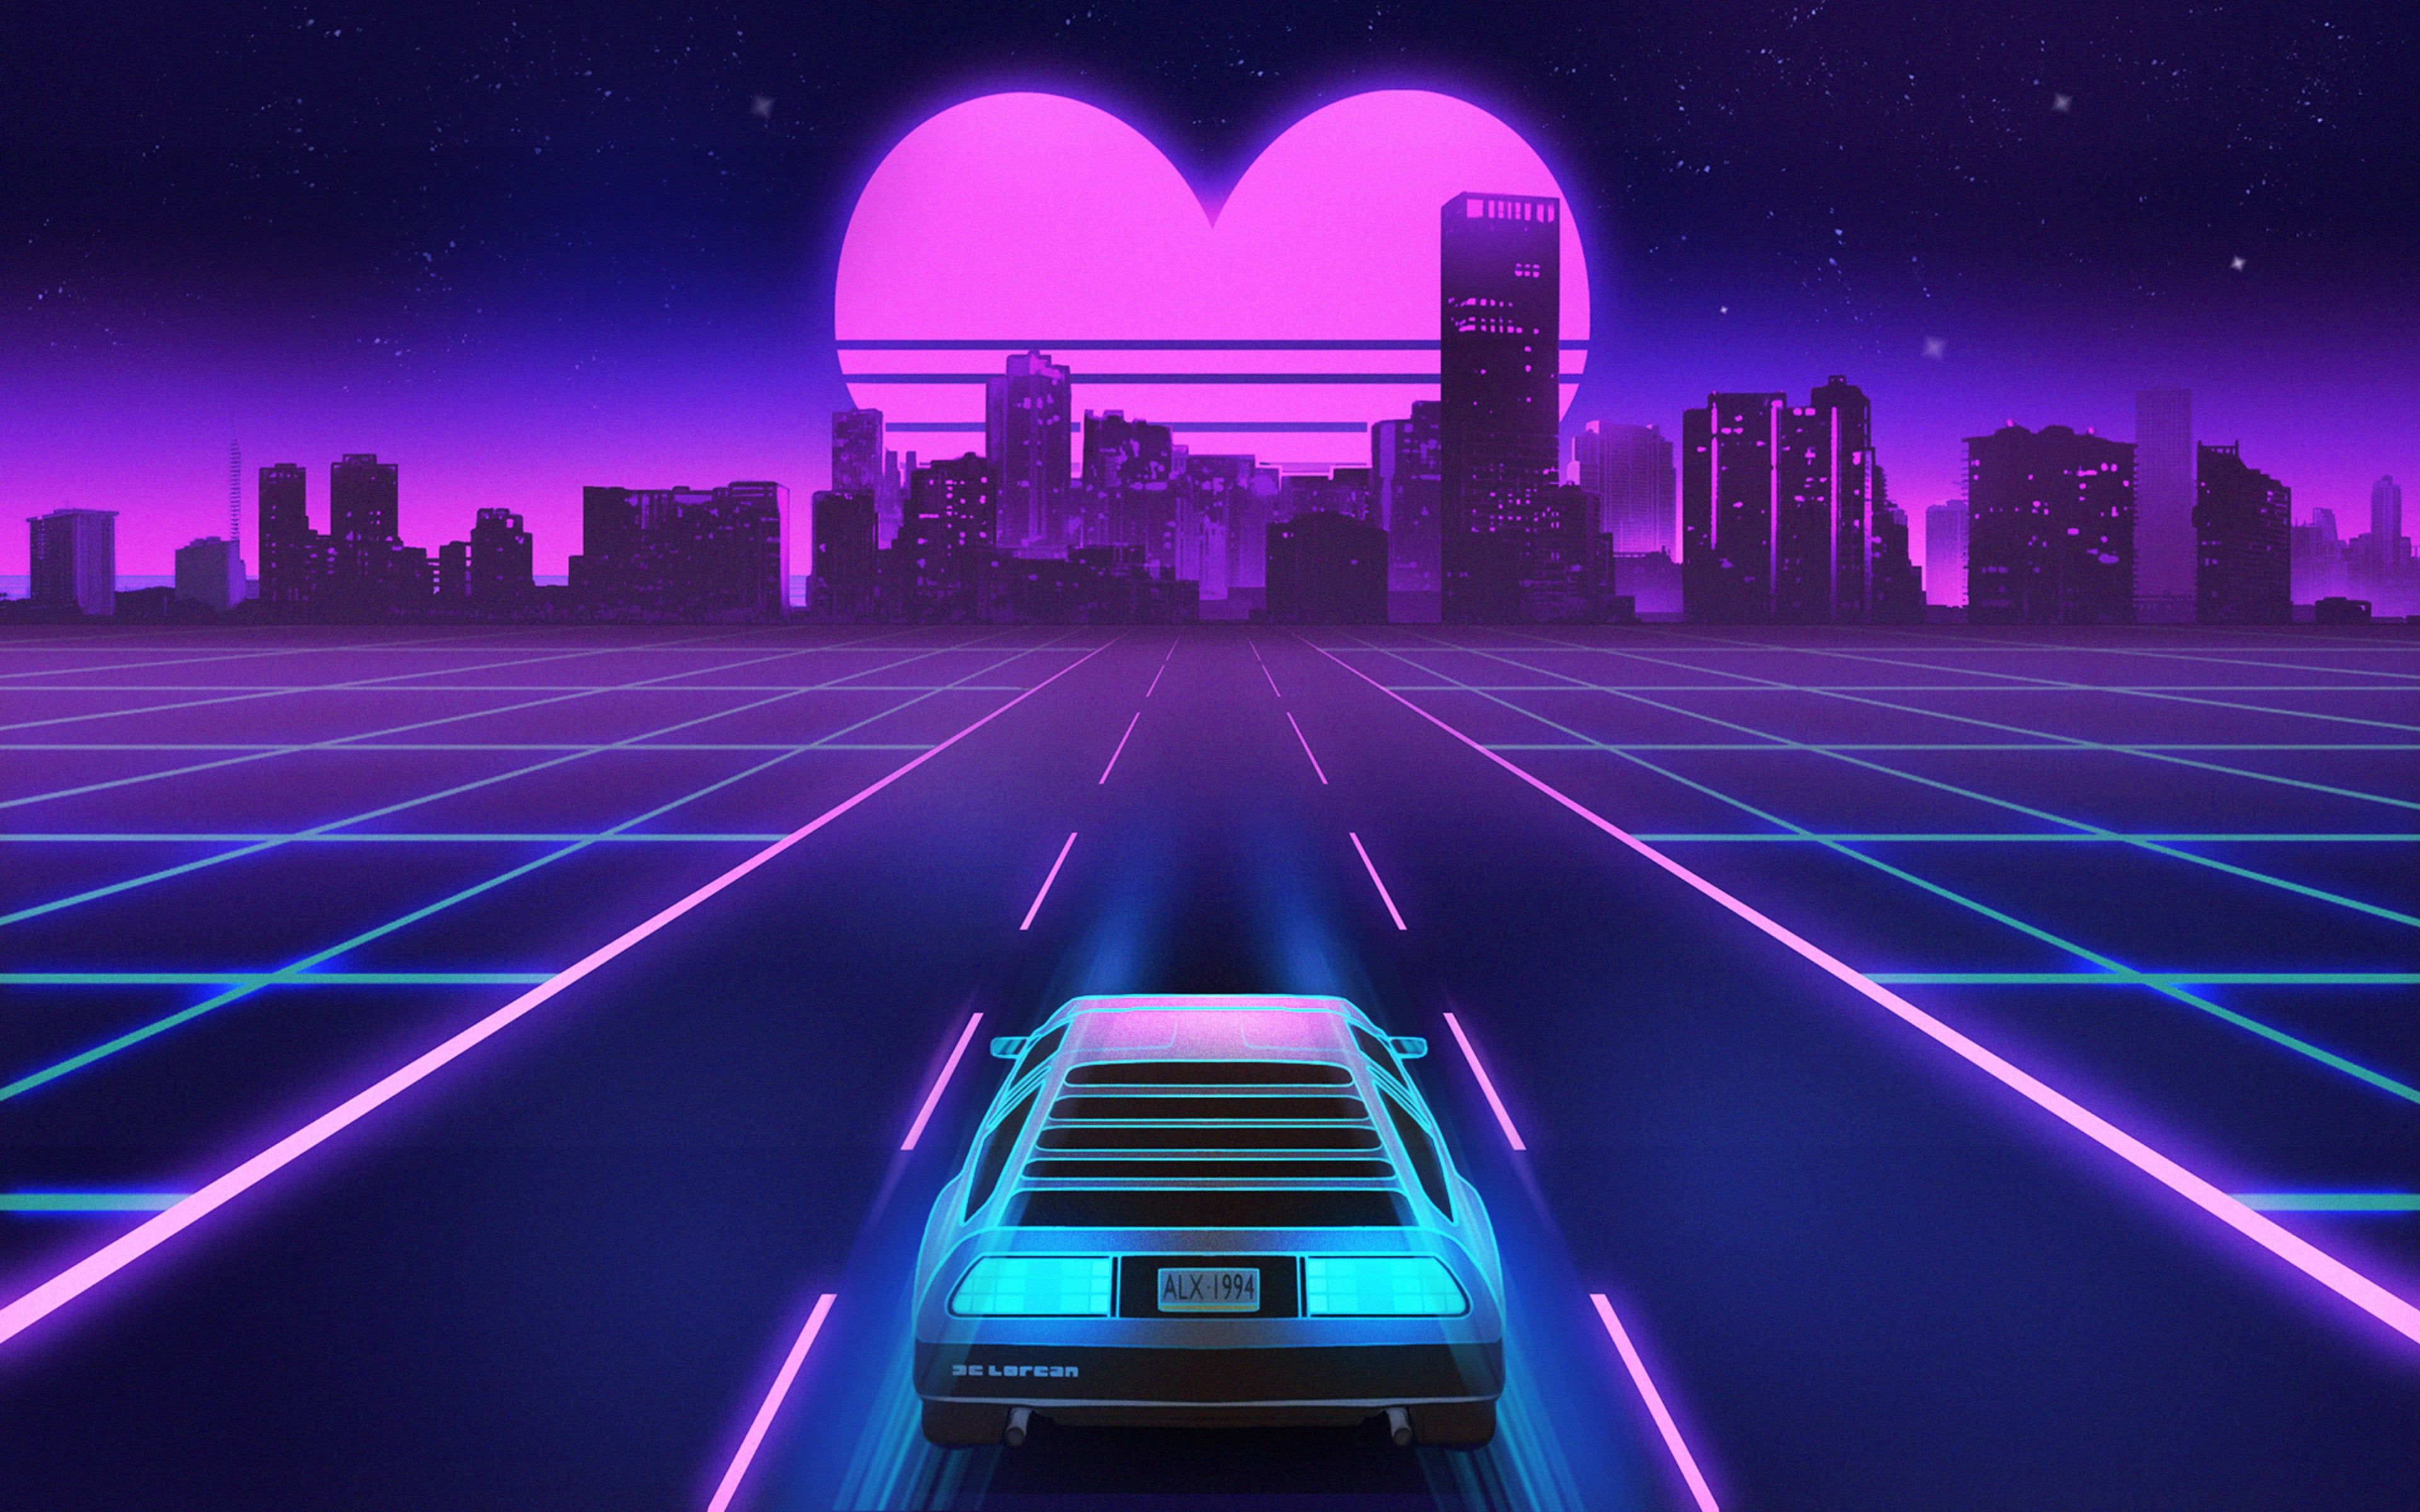 Delorean 4K wallpaper for your desktop or mobile screen free and easy to download